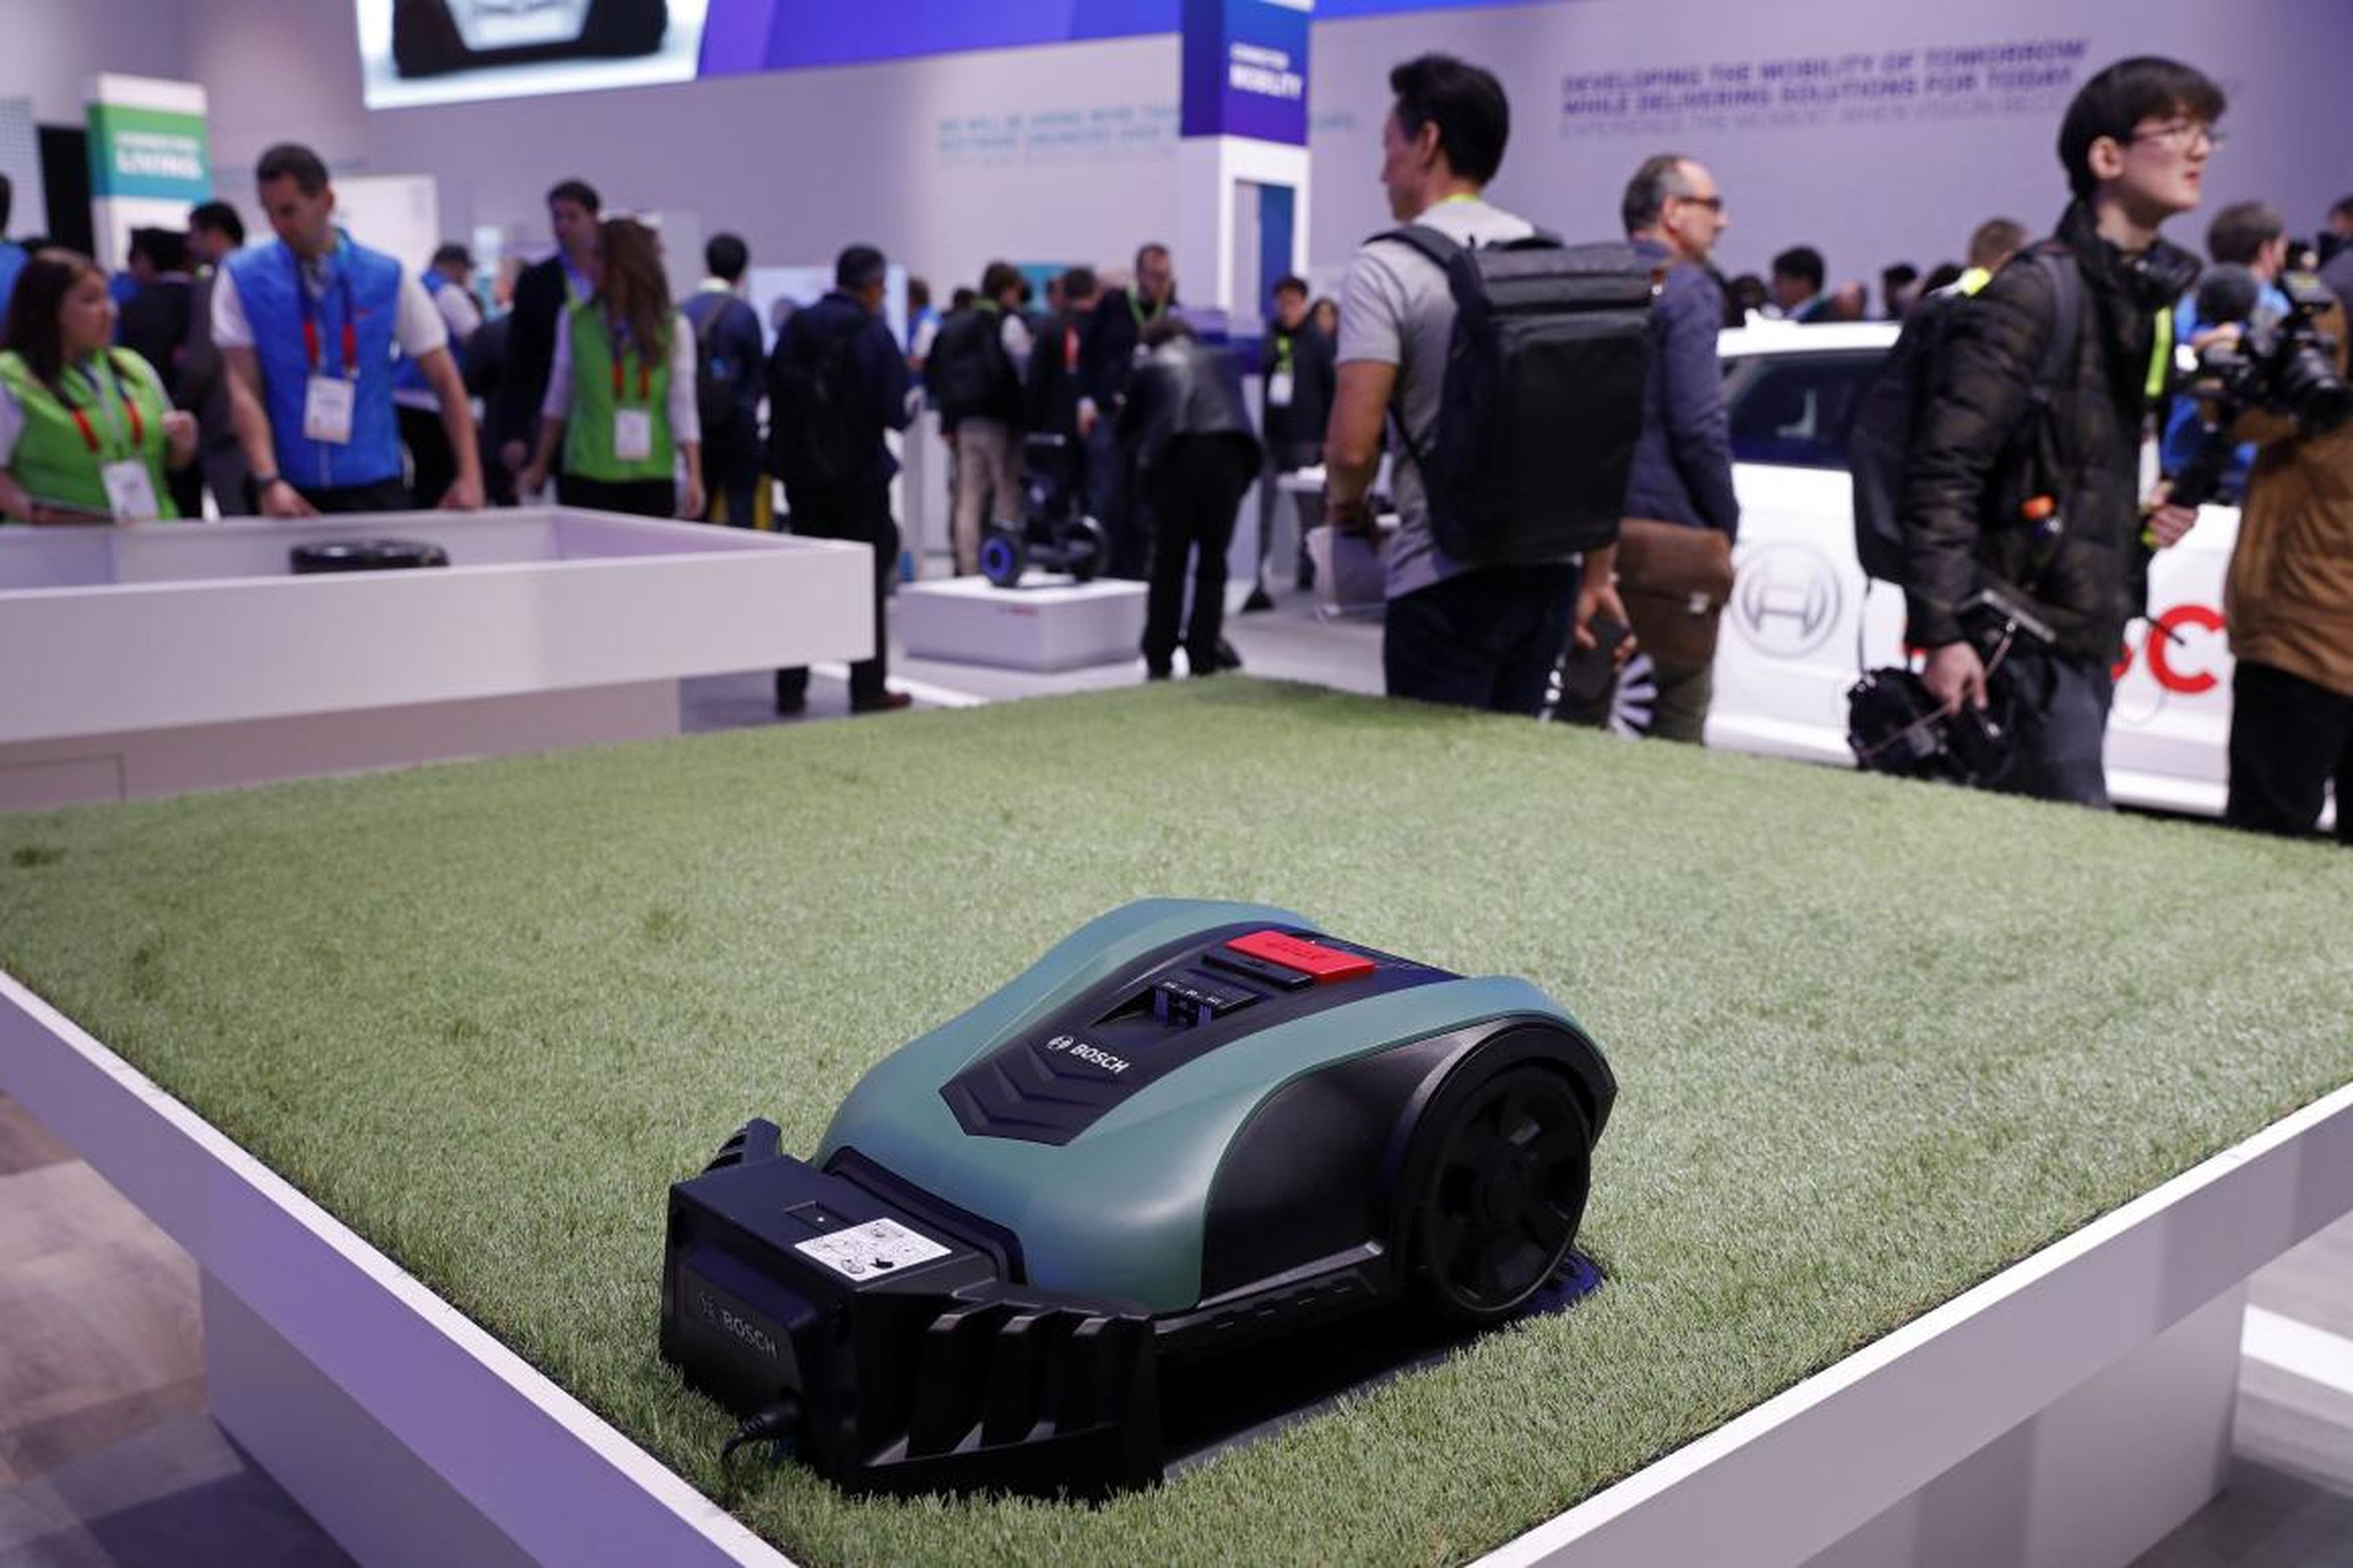 The Indego S+ autonomous lawn mower is like a Roomba, but for your grass.